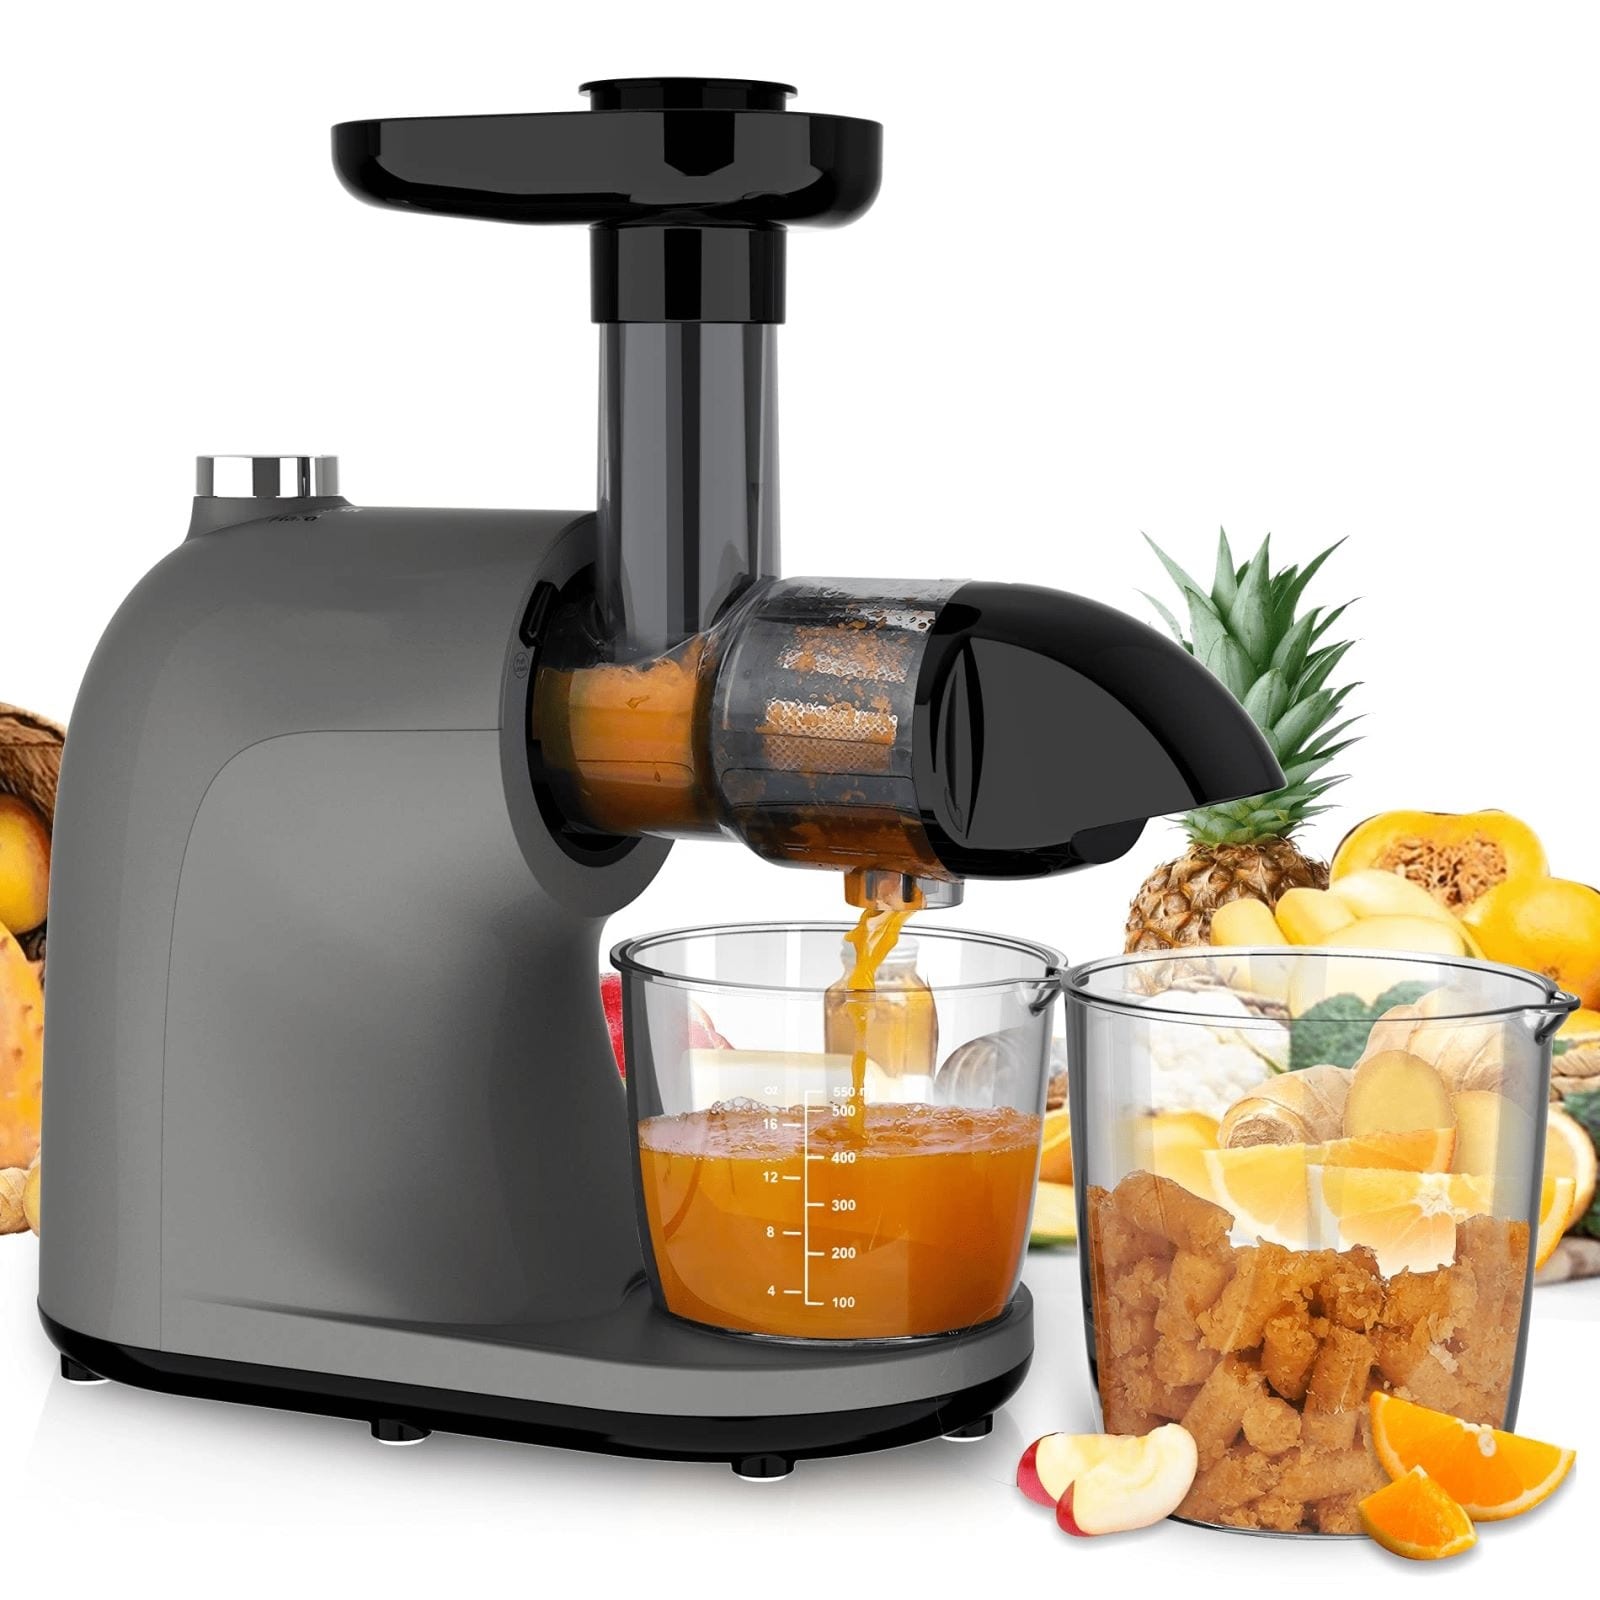 whall Slow Juicer, Masticating Juicer, Celery Juicer Machines, Cold Press  Juicer Machines Vegetable and Fruit, Juicers with Quiet Motor & Reverse